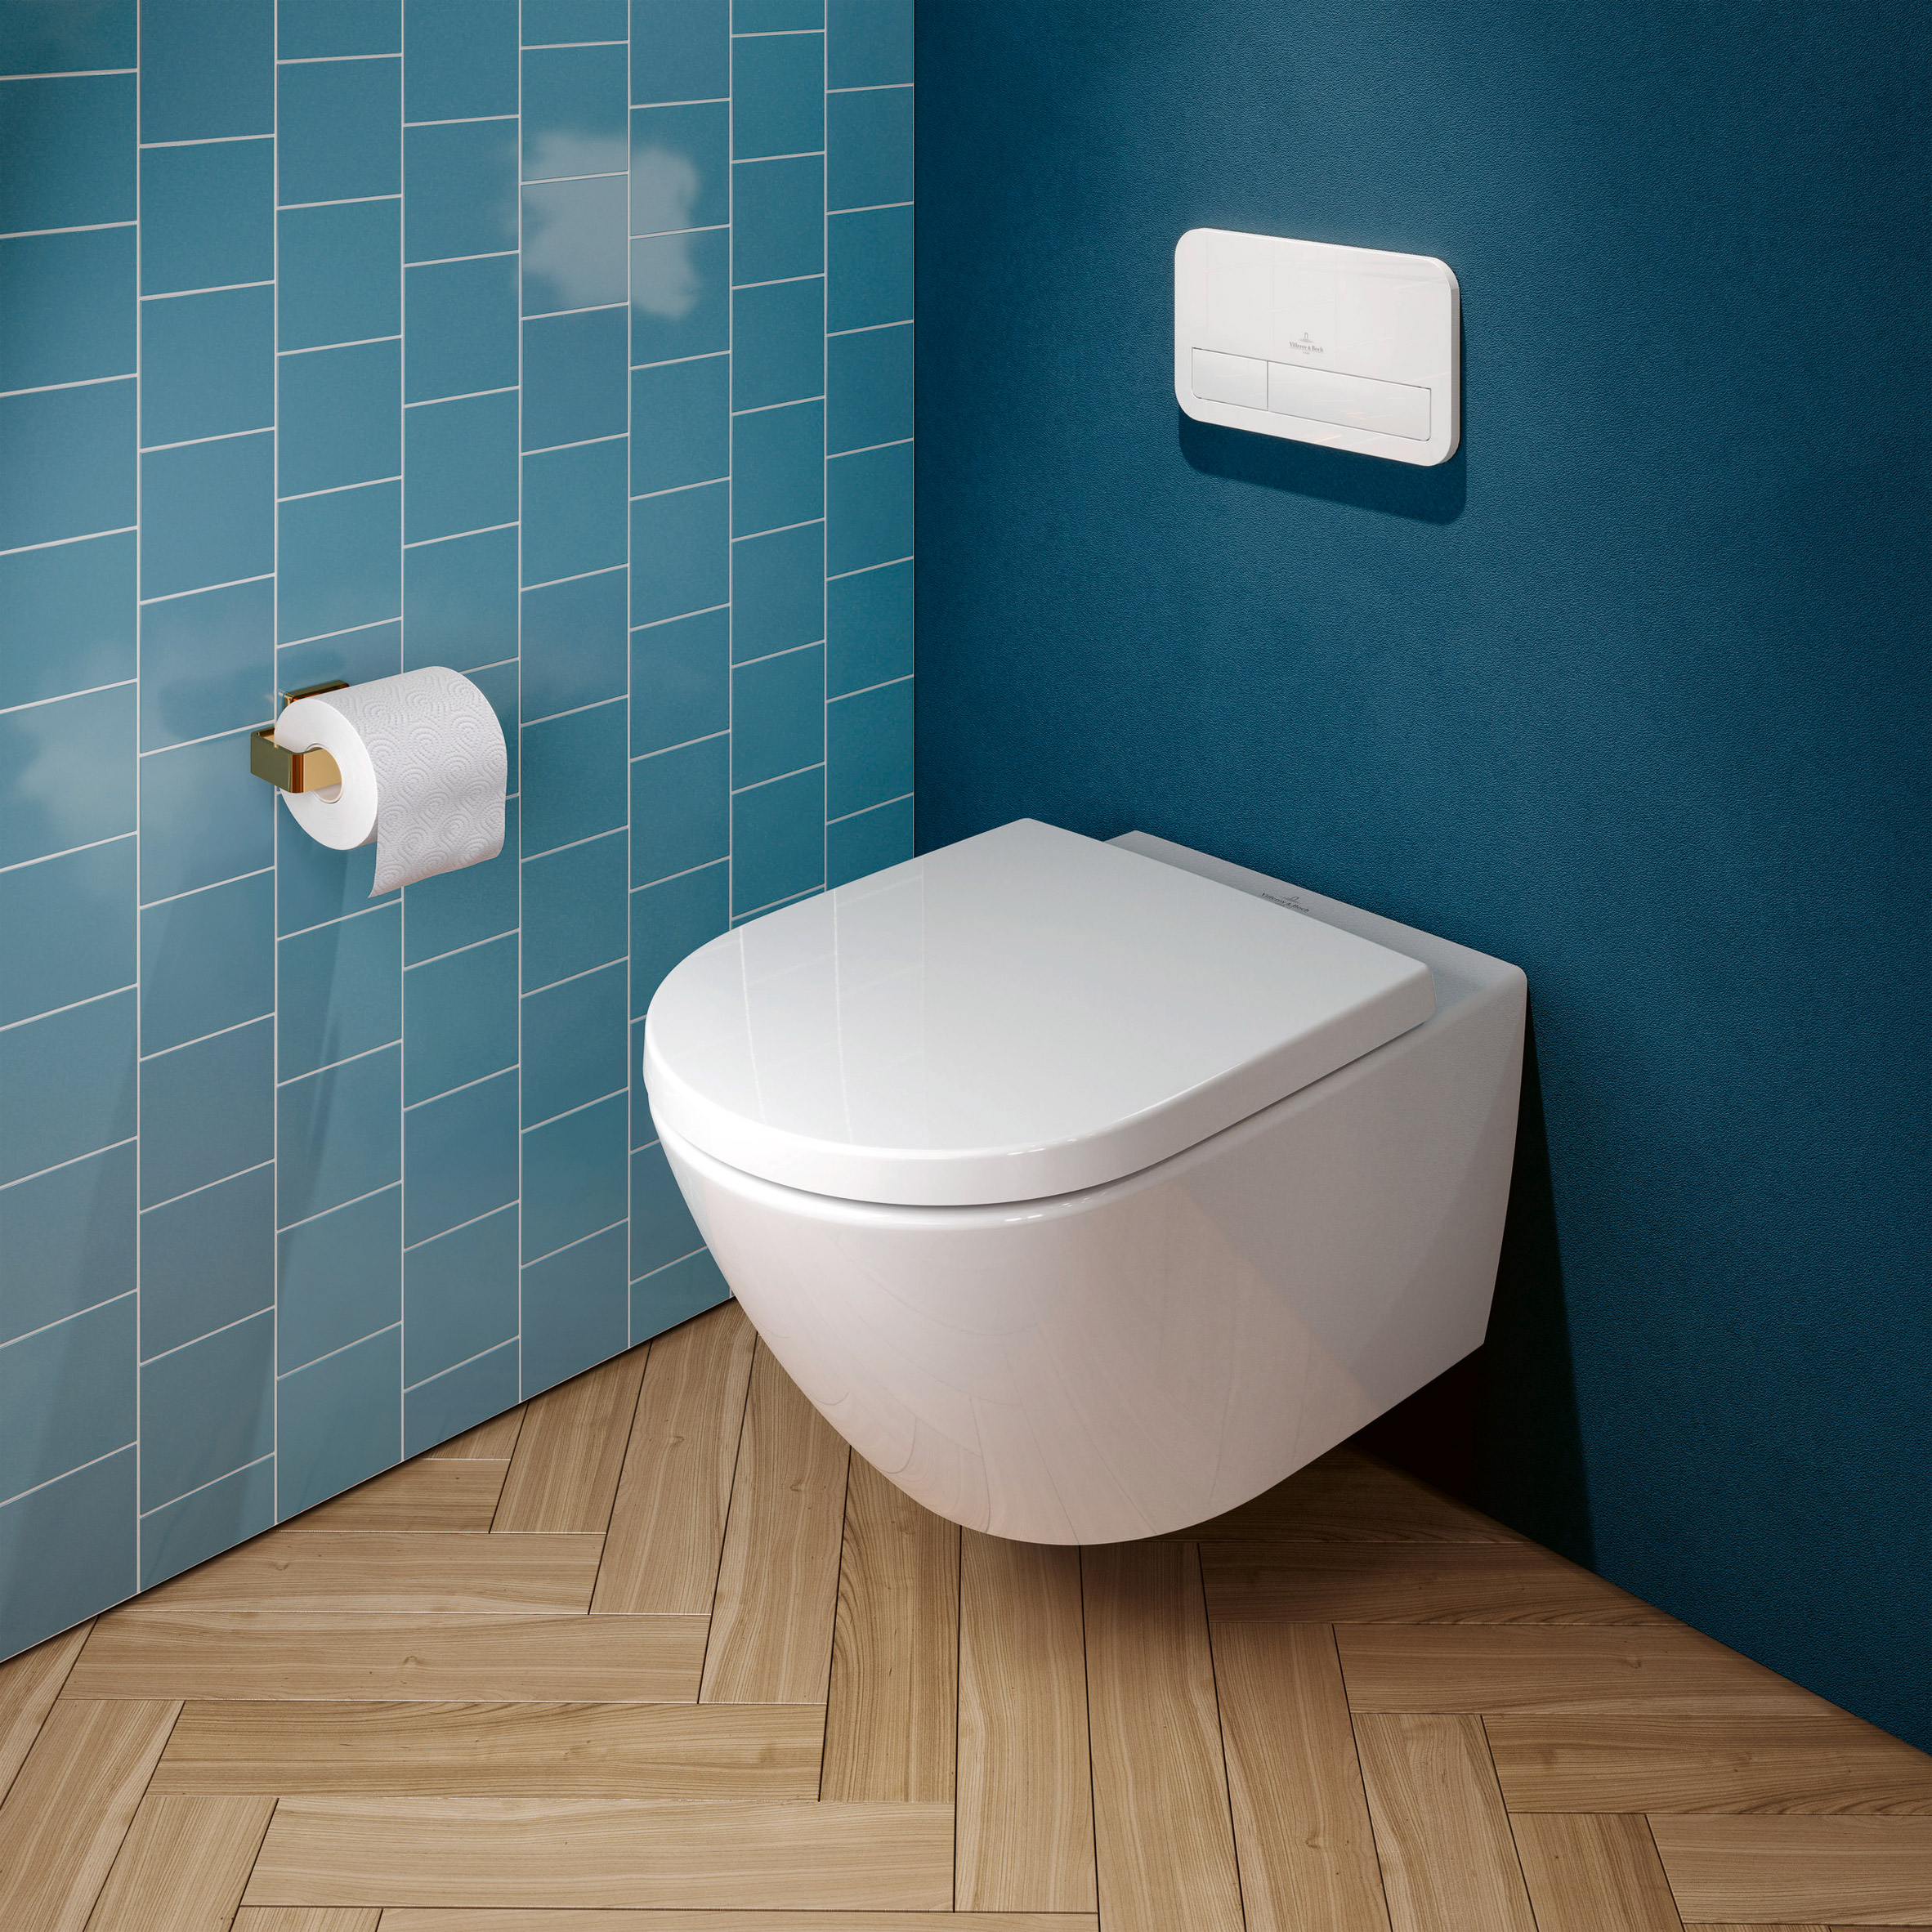 Wall-mounted toilet in a bathroom with blue tiled walls and wooden flooring 